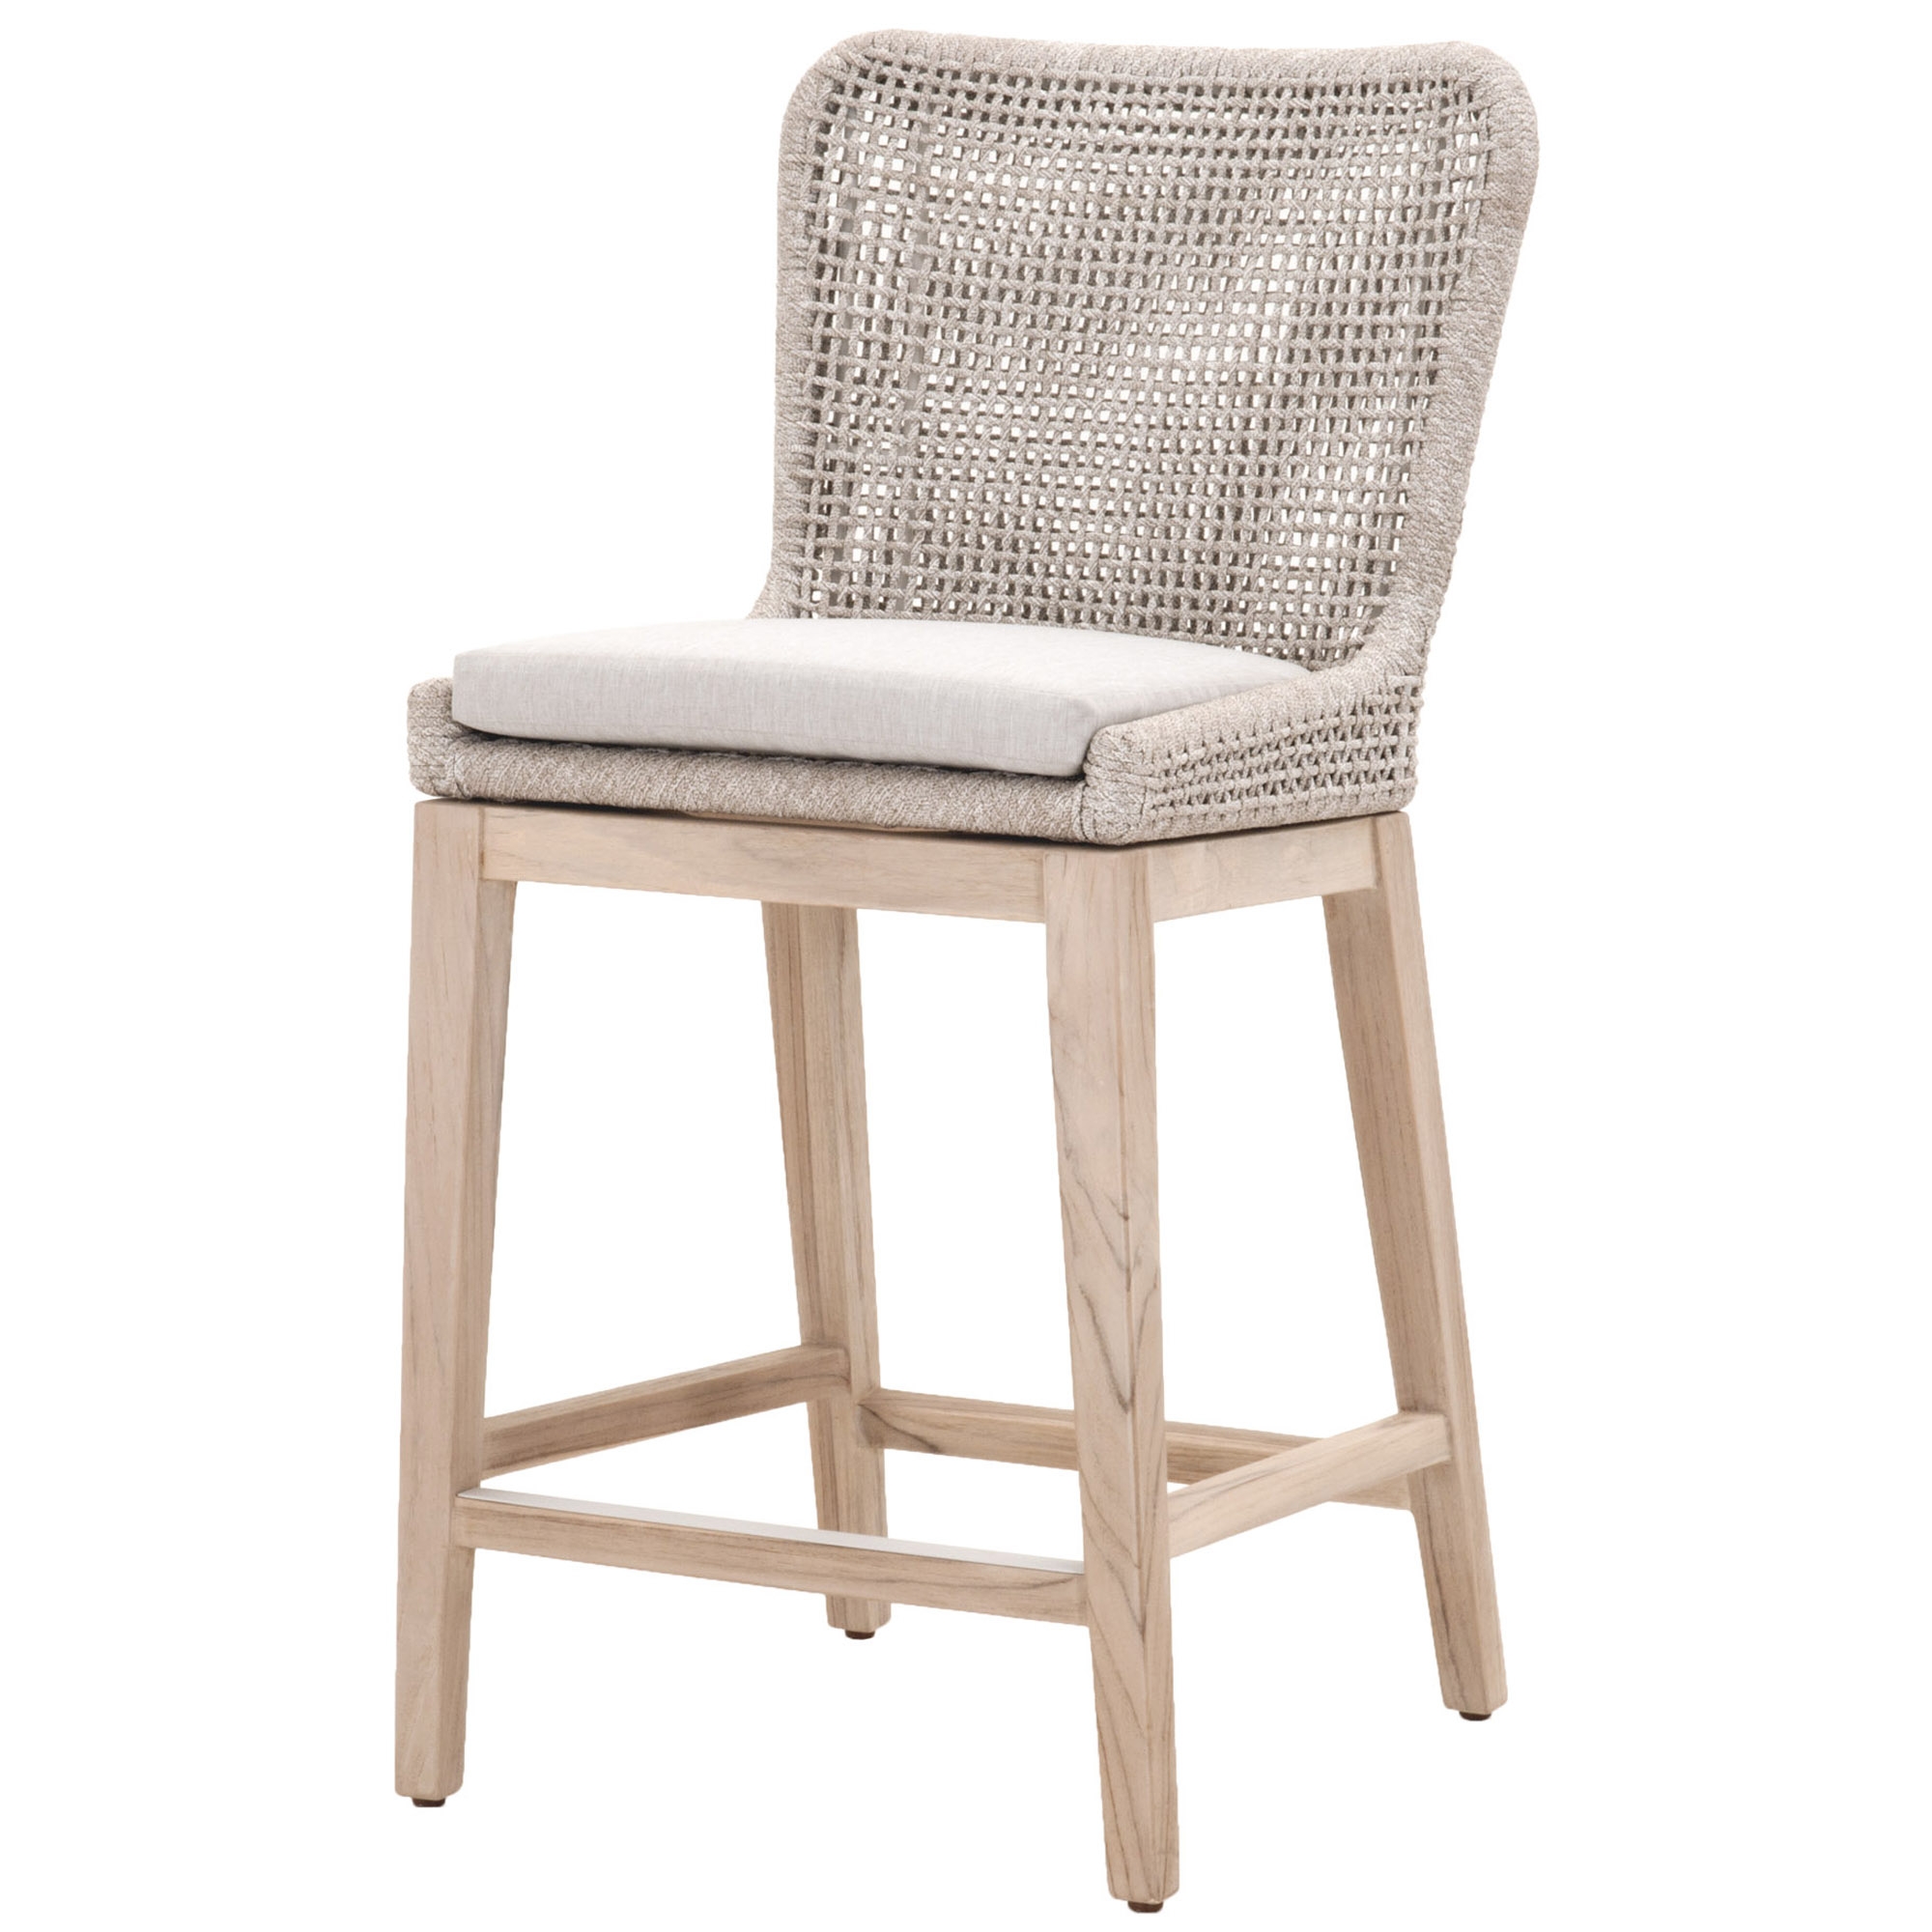 Mesh Outdoor Counter Stool - Image 1